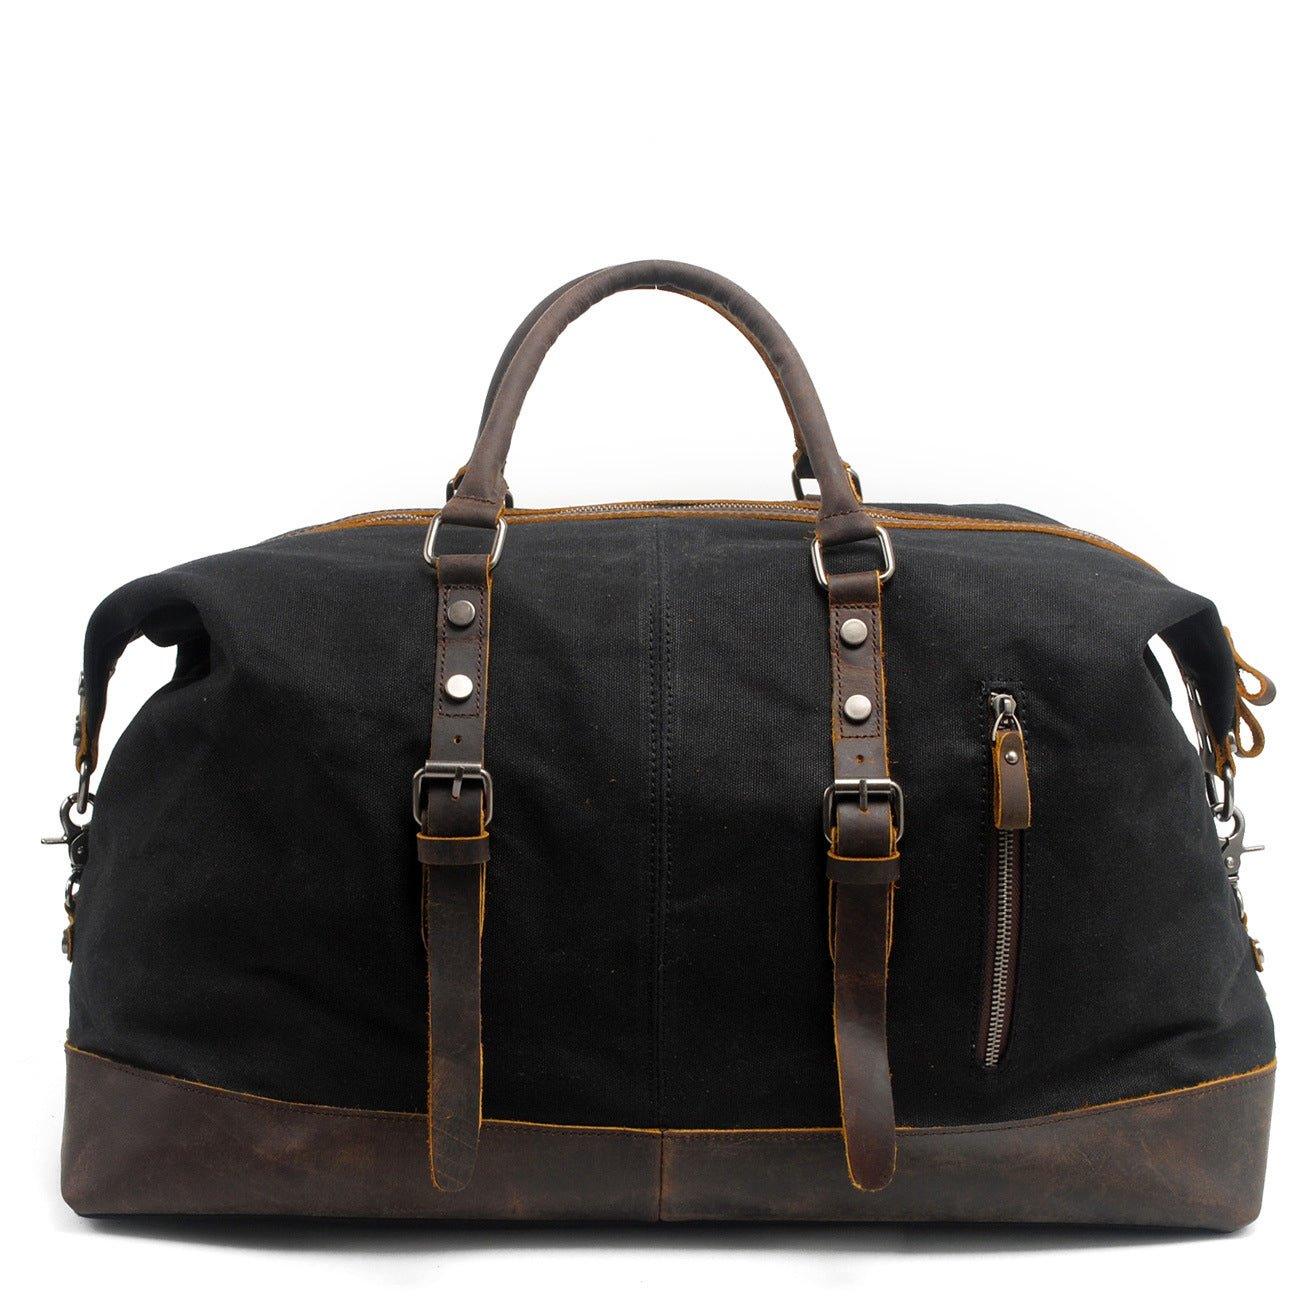 Waxed Canvas Weekender Duffle Bag: Personalized, Expandable, Rugged,  Travel, Brown - No. 495 (Made in the USA)